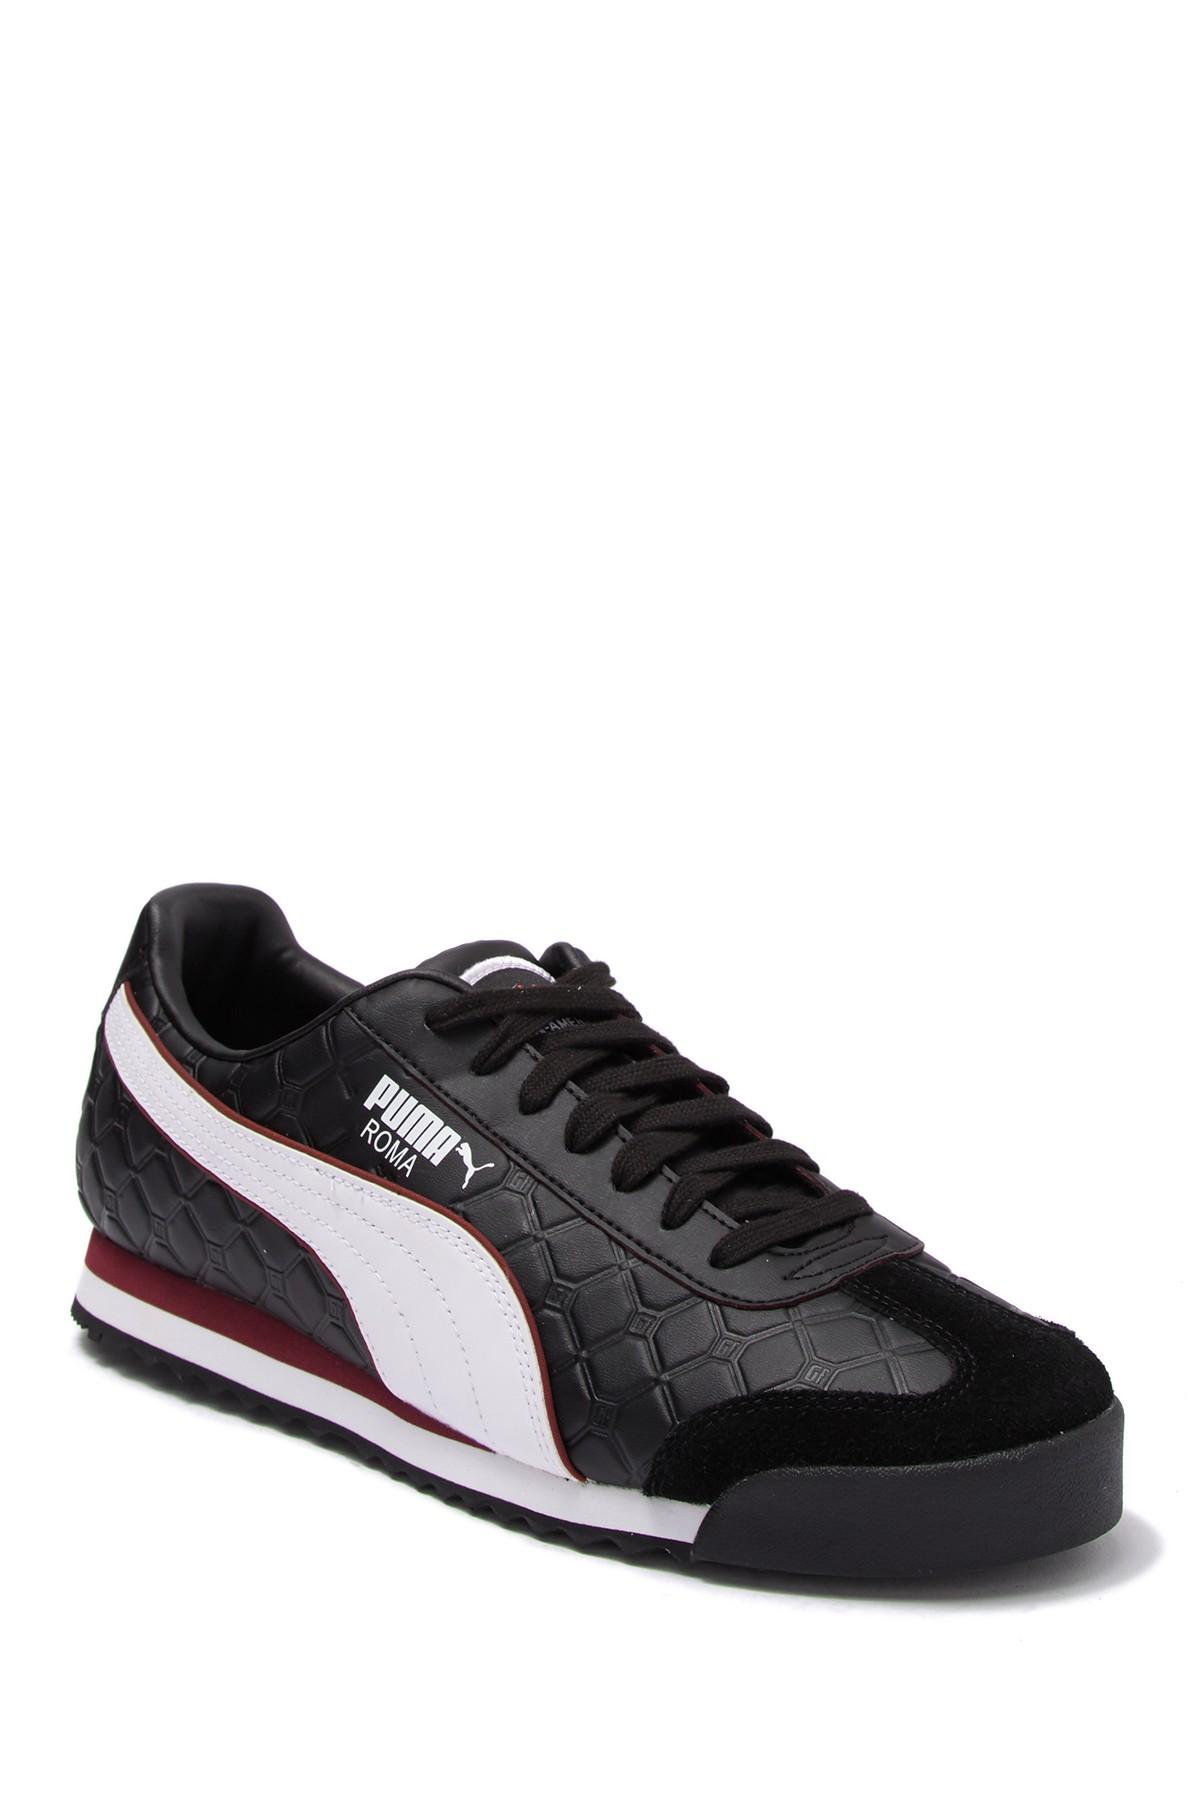 PUMA Leather X The Godfather Roma Louis Sneakers in Black for Men | Lyst